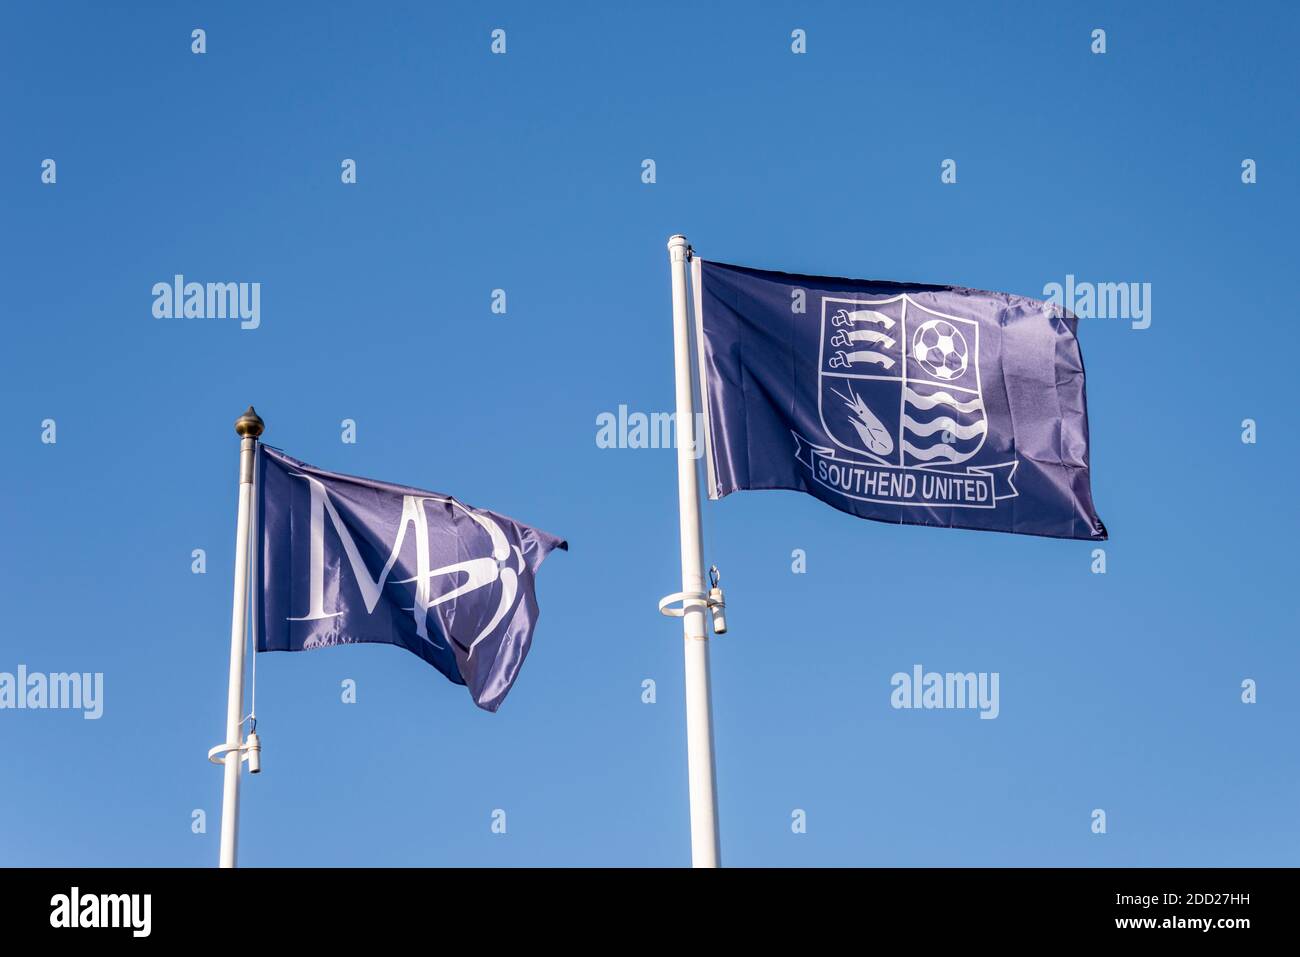 Southend United Football Club and Martin Dawn flags flying in blue sky outside Roots Hall, Southend on Sea, Essex, UK. New flags on pole Stock Photo